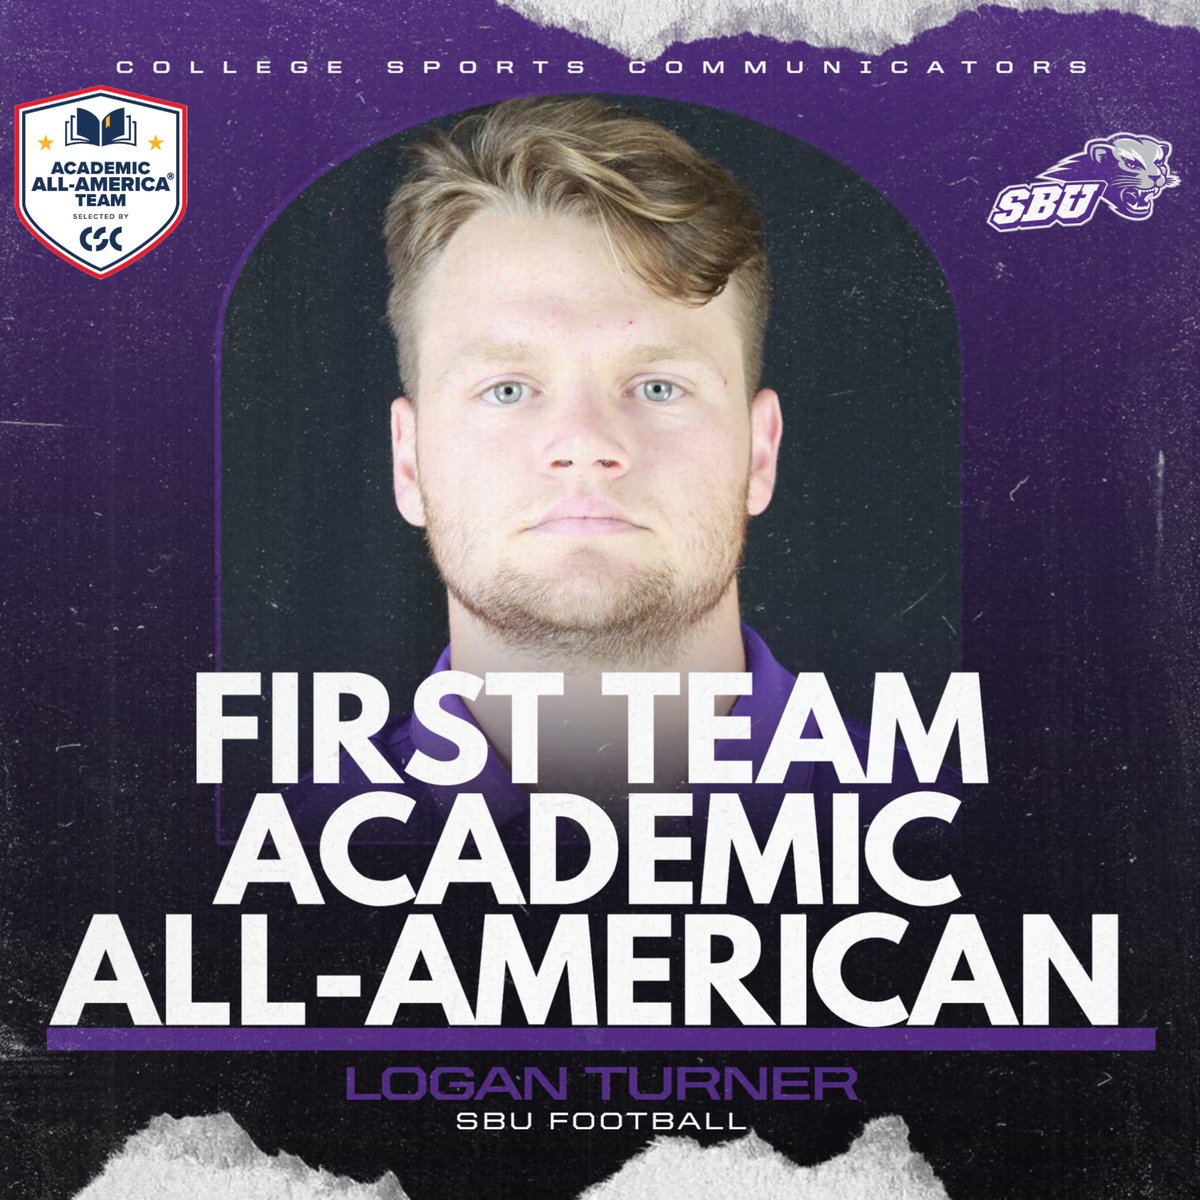 Wanted another Logan Turner award? You got one!! Talented athlete on the field and even more talented off the field, winning 1st team Academic All-American!! Way to go Logan! #RollCats #CatTown @GLVCsports @SBU_Football